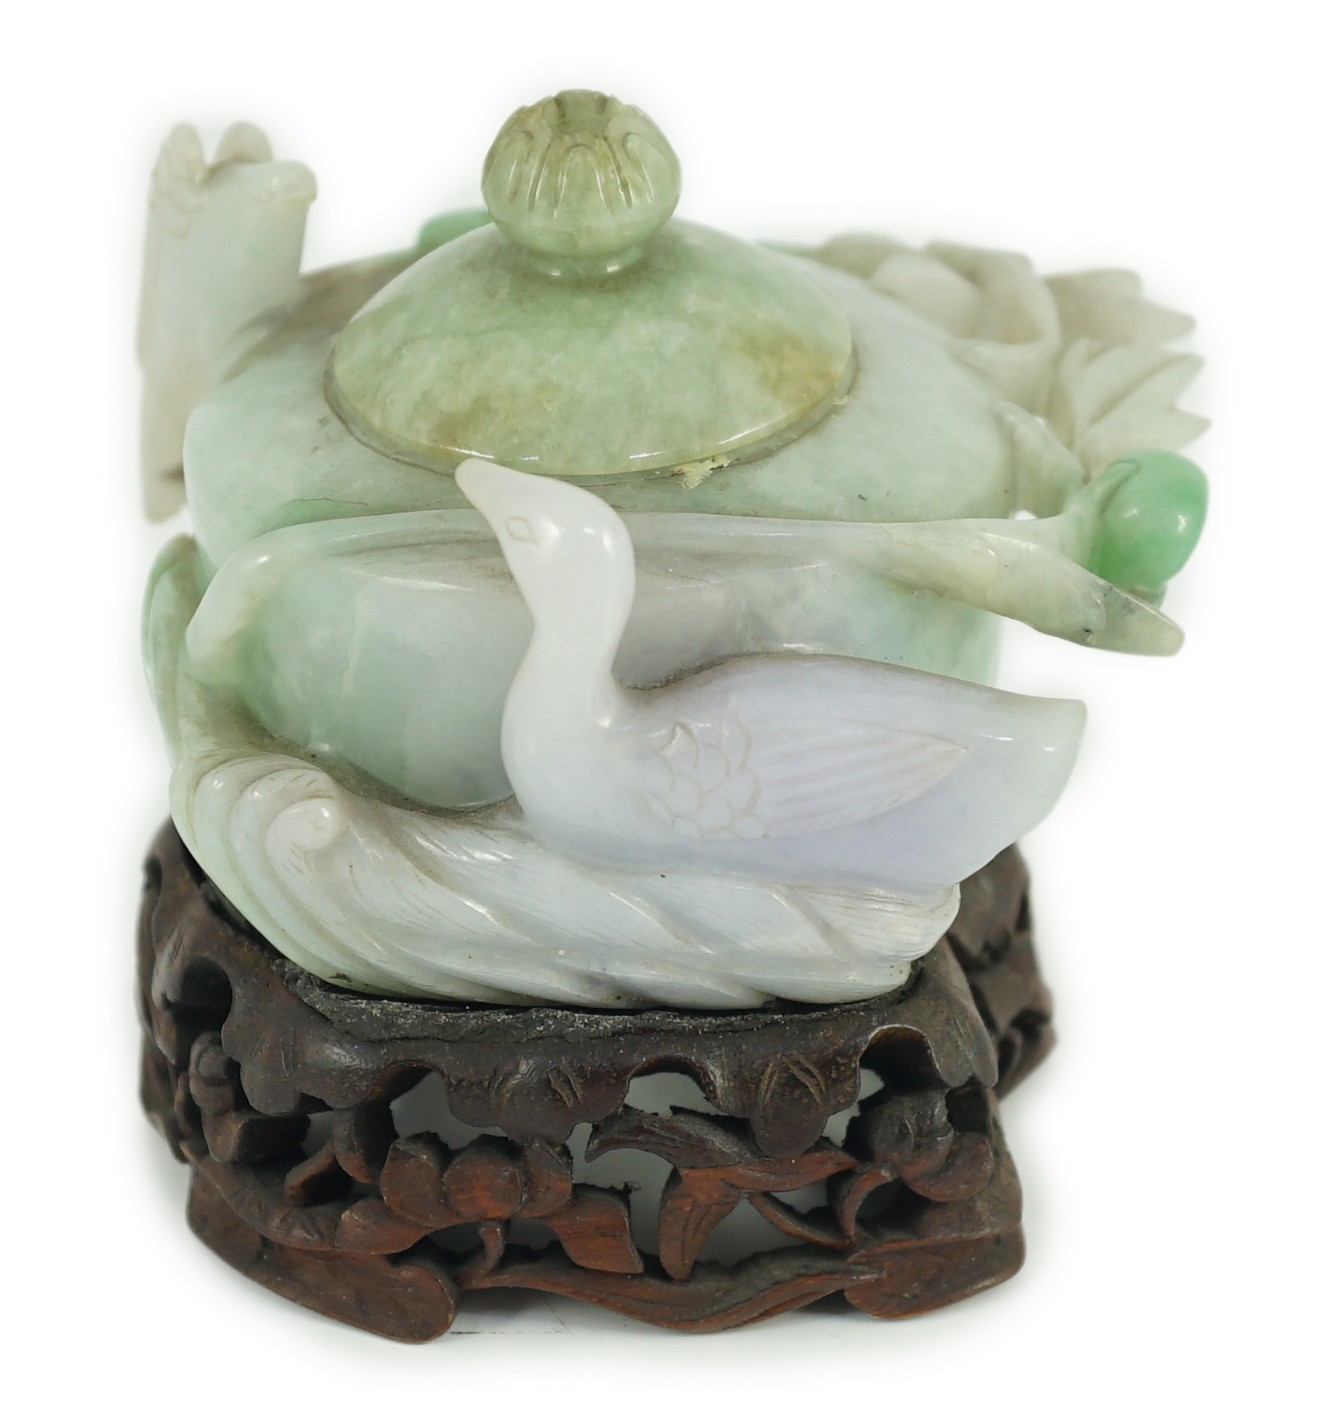 A Chinese lavender and green jadeite water pot and stand, late 19th century, 9.3cm at widest point, wood stand                                                                                                              